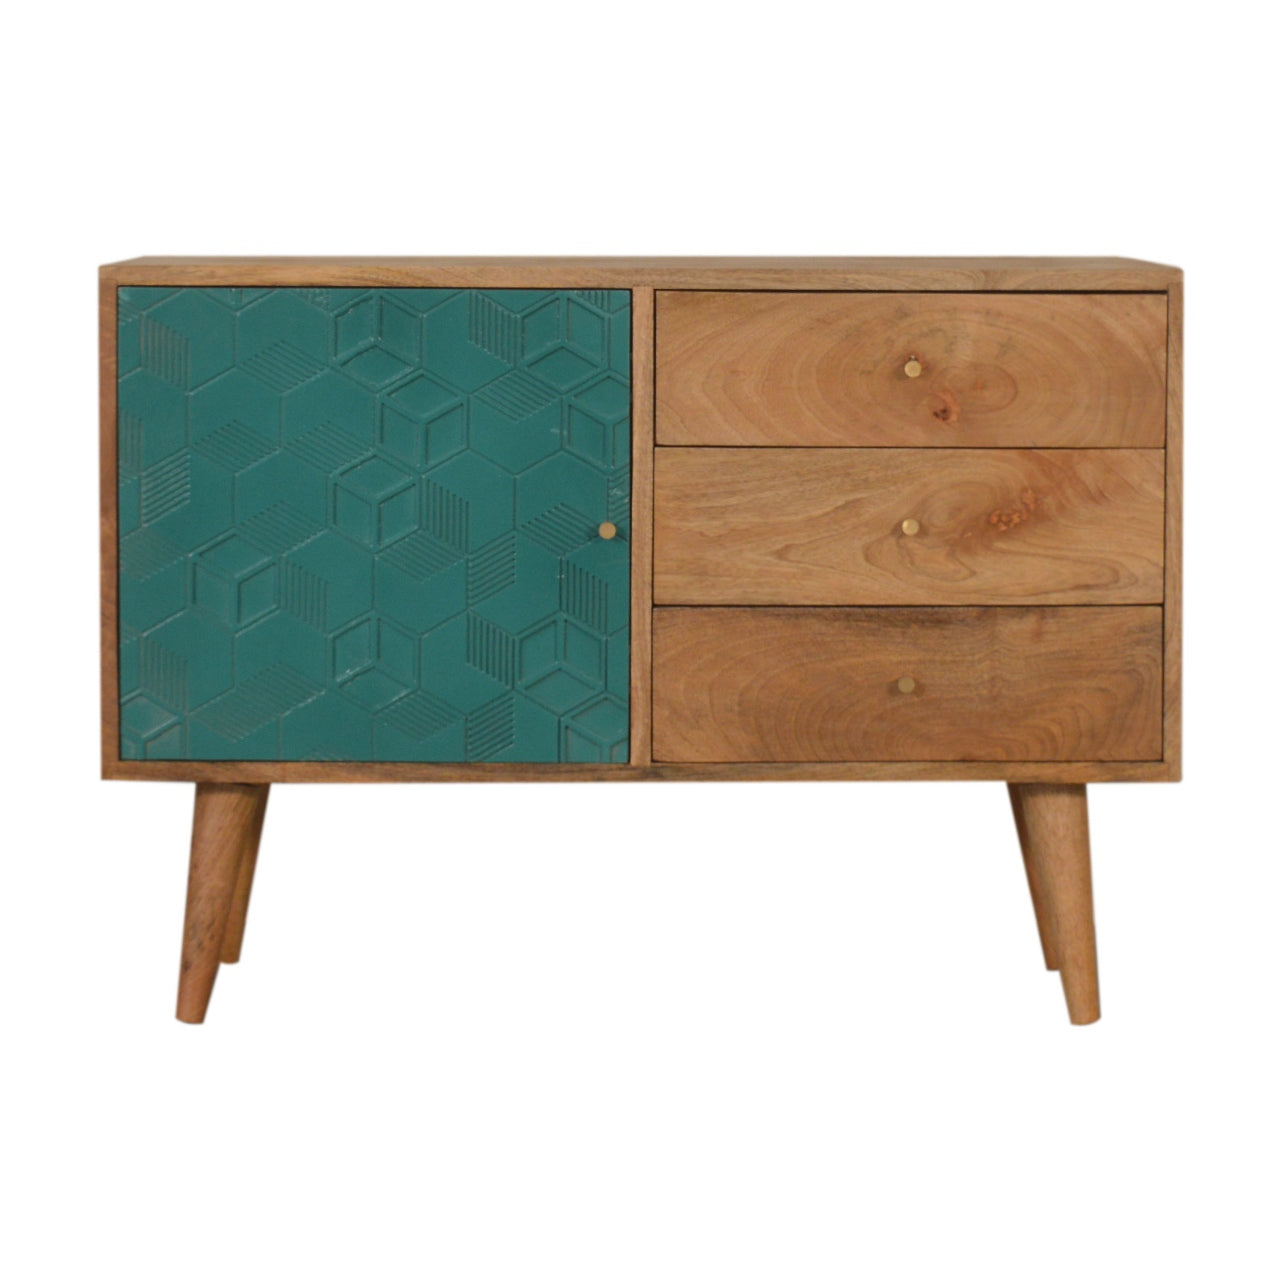 View Acadia Teal Cabinet with Drawers information